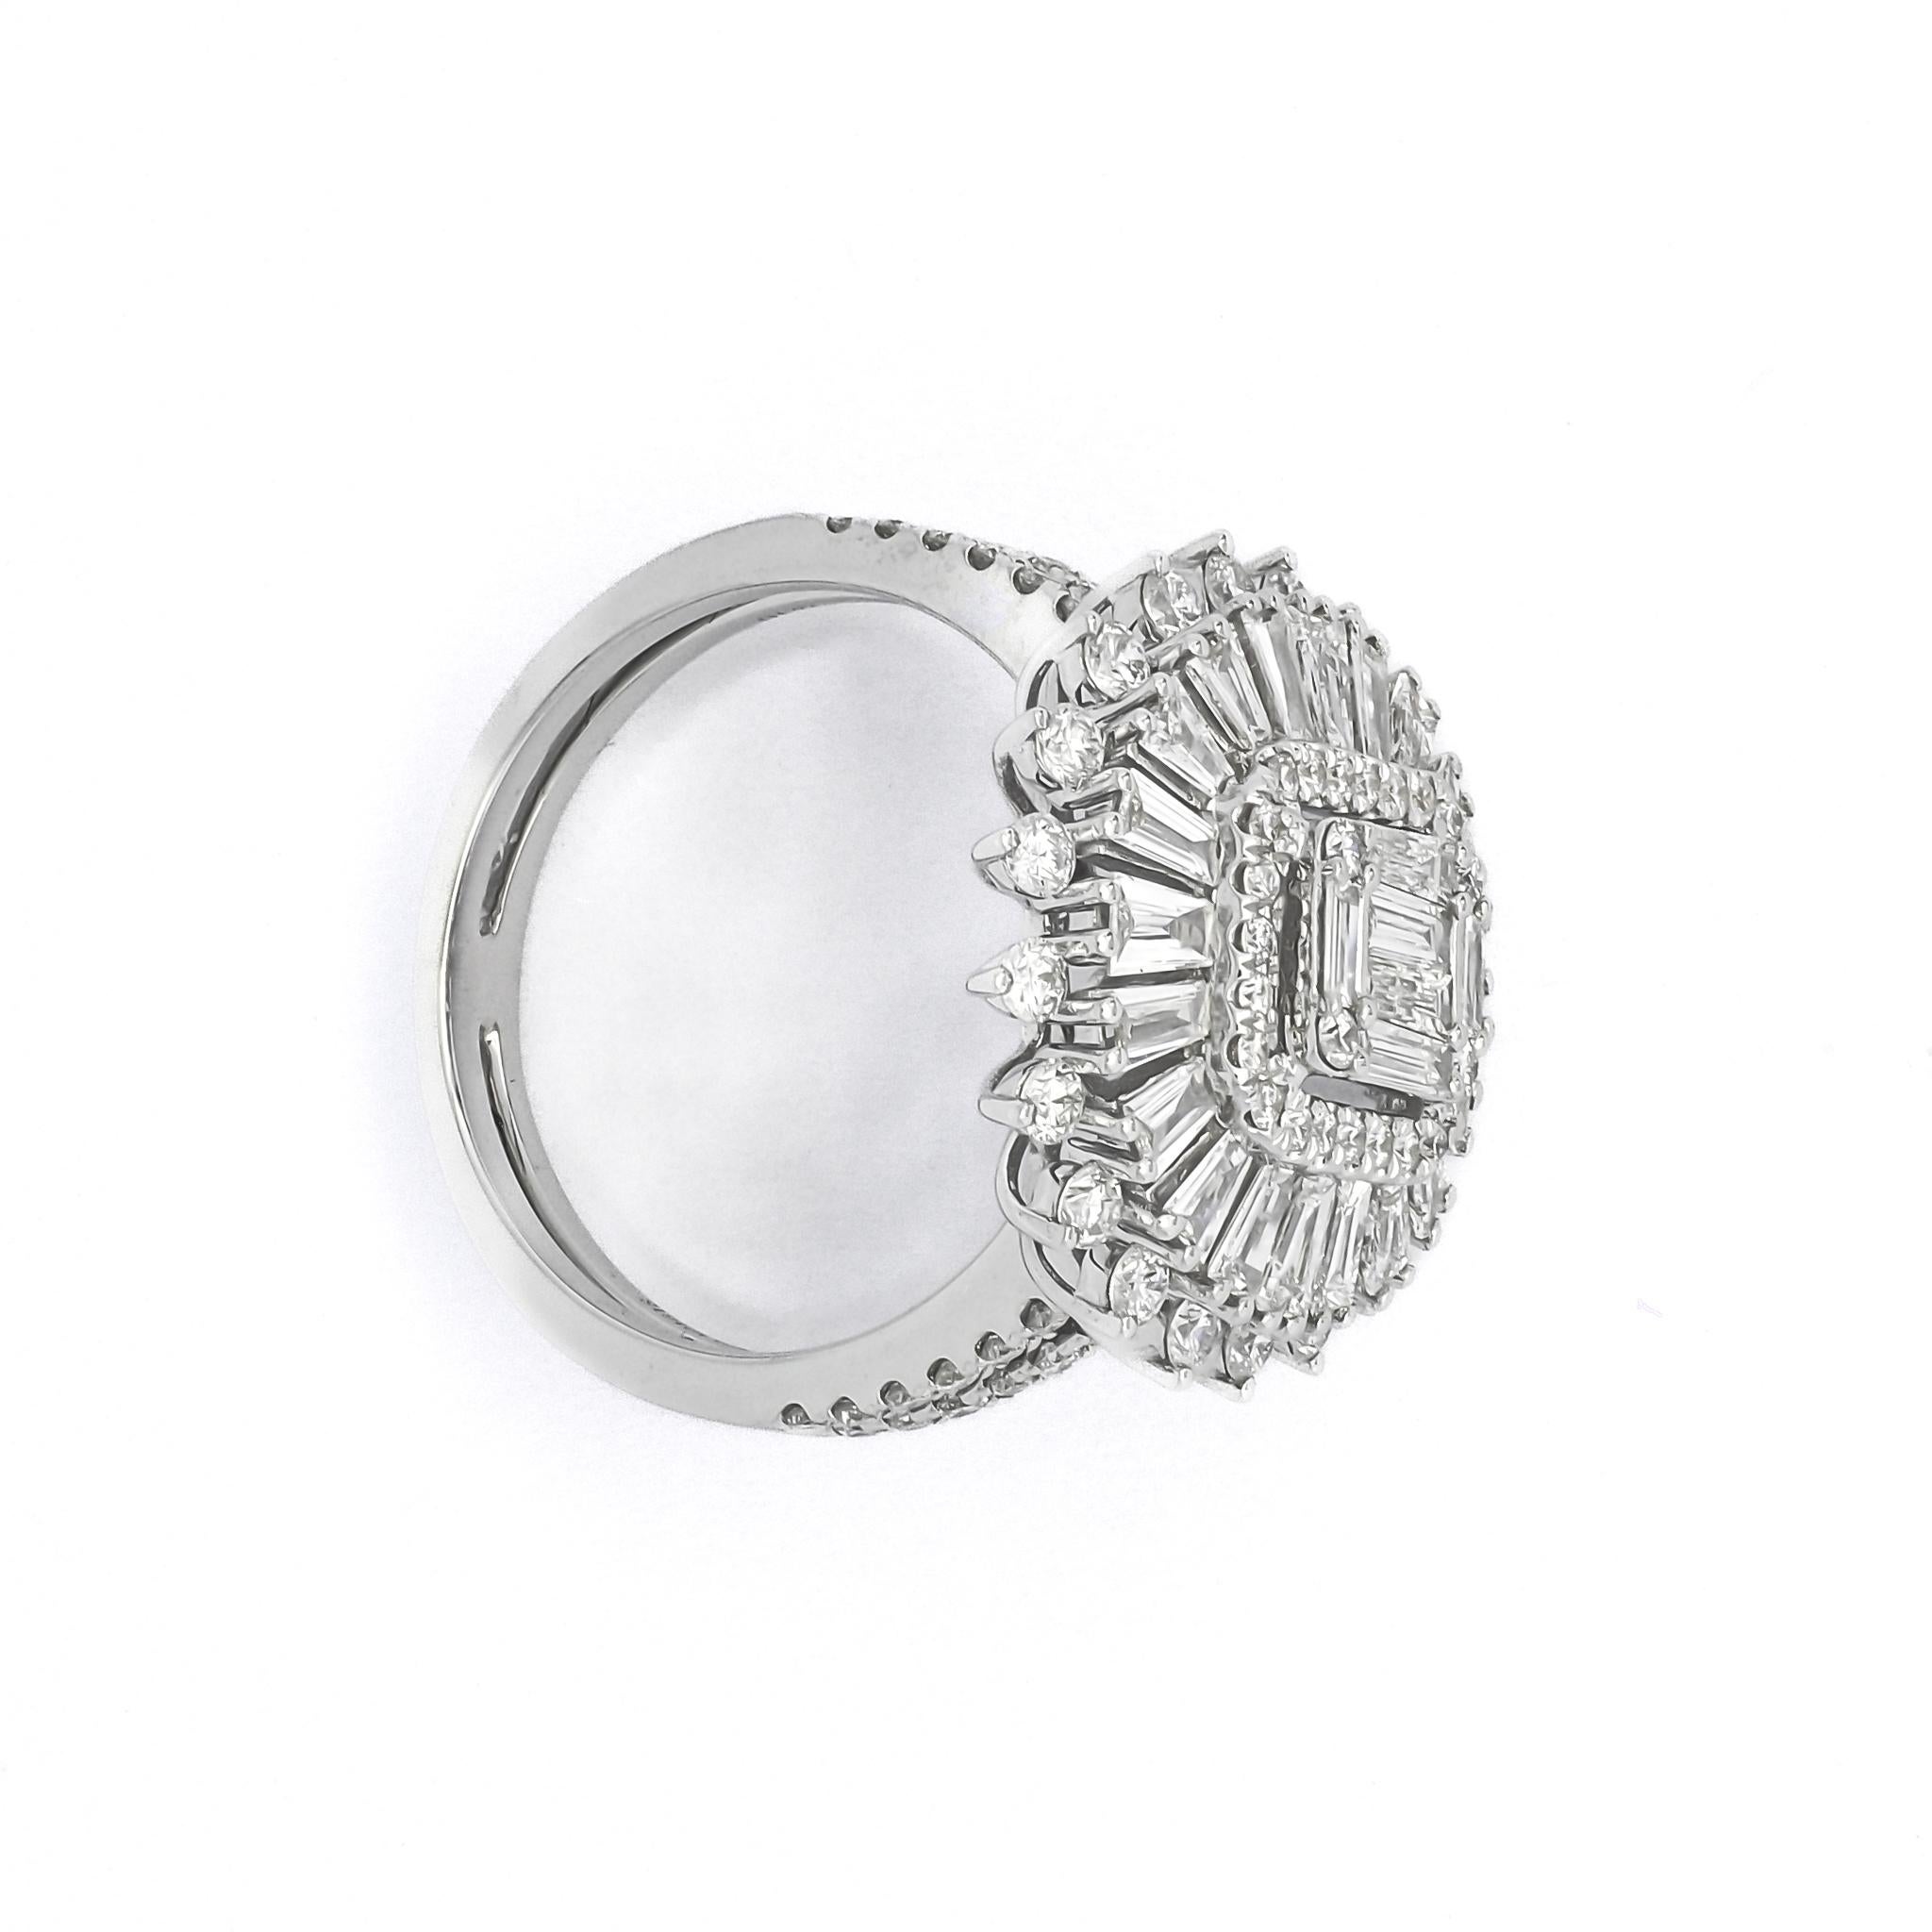 The Baguette Cluster in the middle with the halo and star burst ring stands as a striking testament to bold sophistication and contemporary elegance. 

The noteworthy 1.72-carat diamond weight adds a sense of opulence and glamour to the ring,